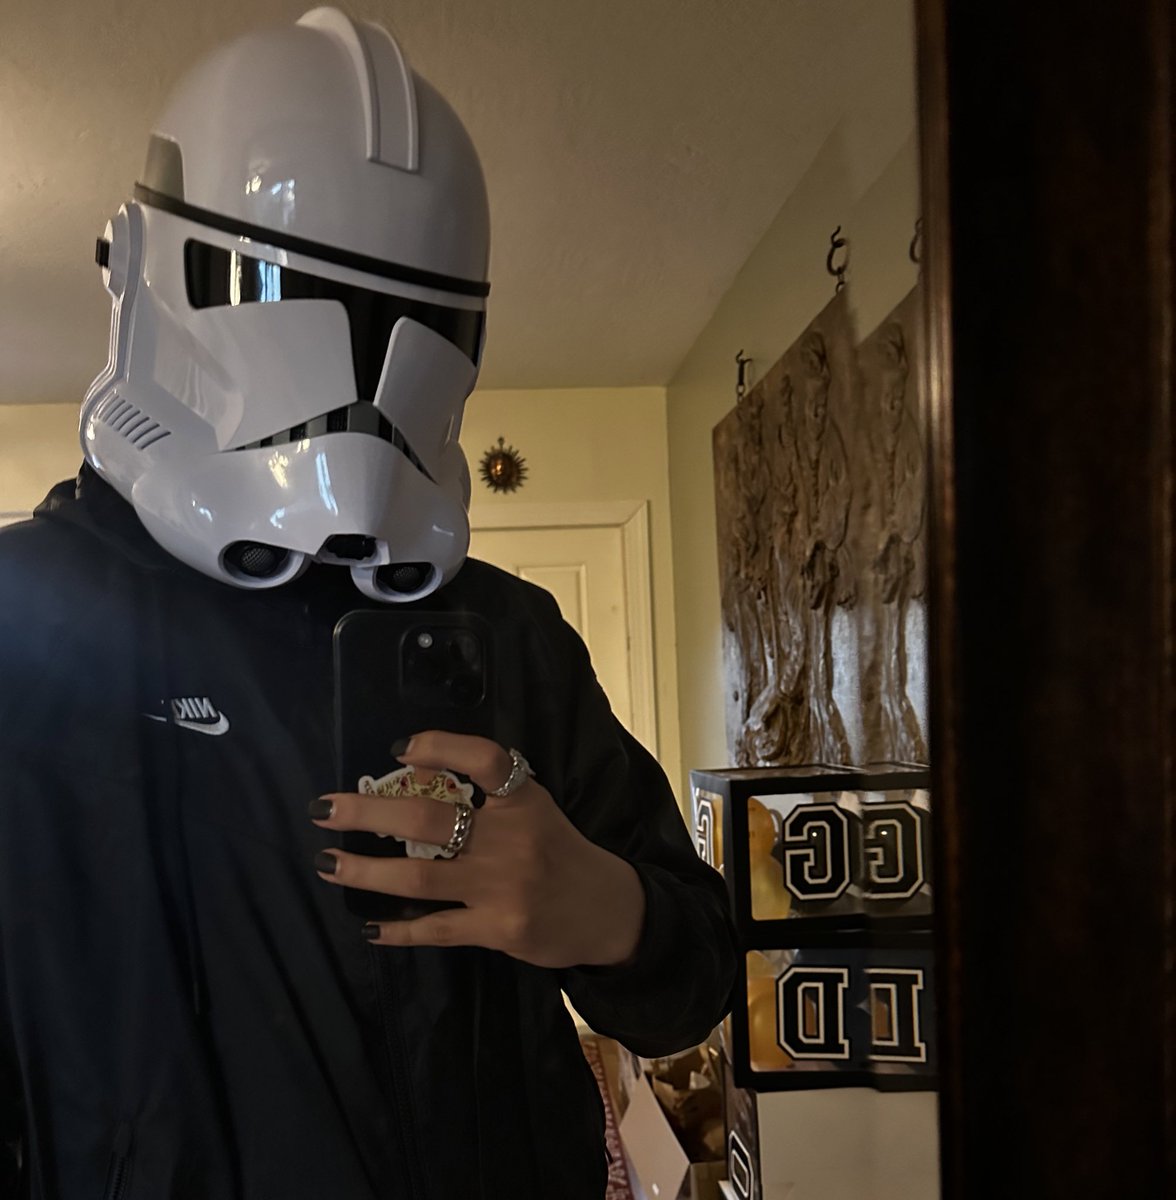 I’m part of the 501st Clone Battalion now